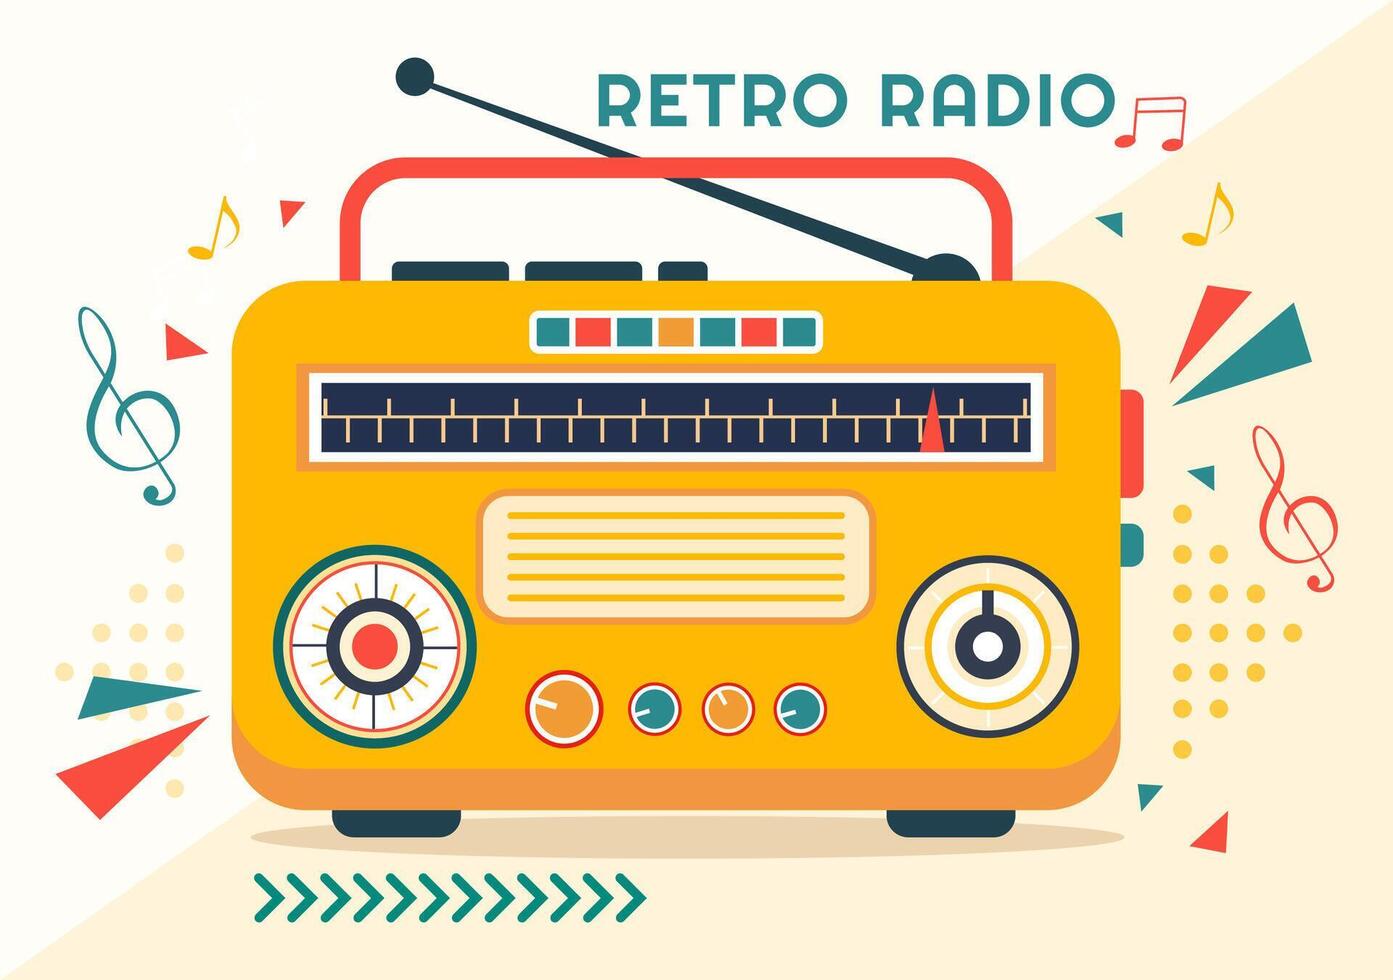 Retro Radio Vector Illustration with Player Style for Record, Old Receiver, Interviews Celebrity and Listening to Music in Flat Cartoon Background